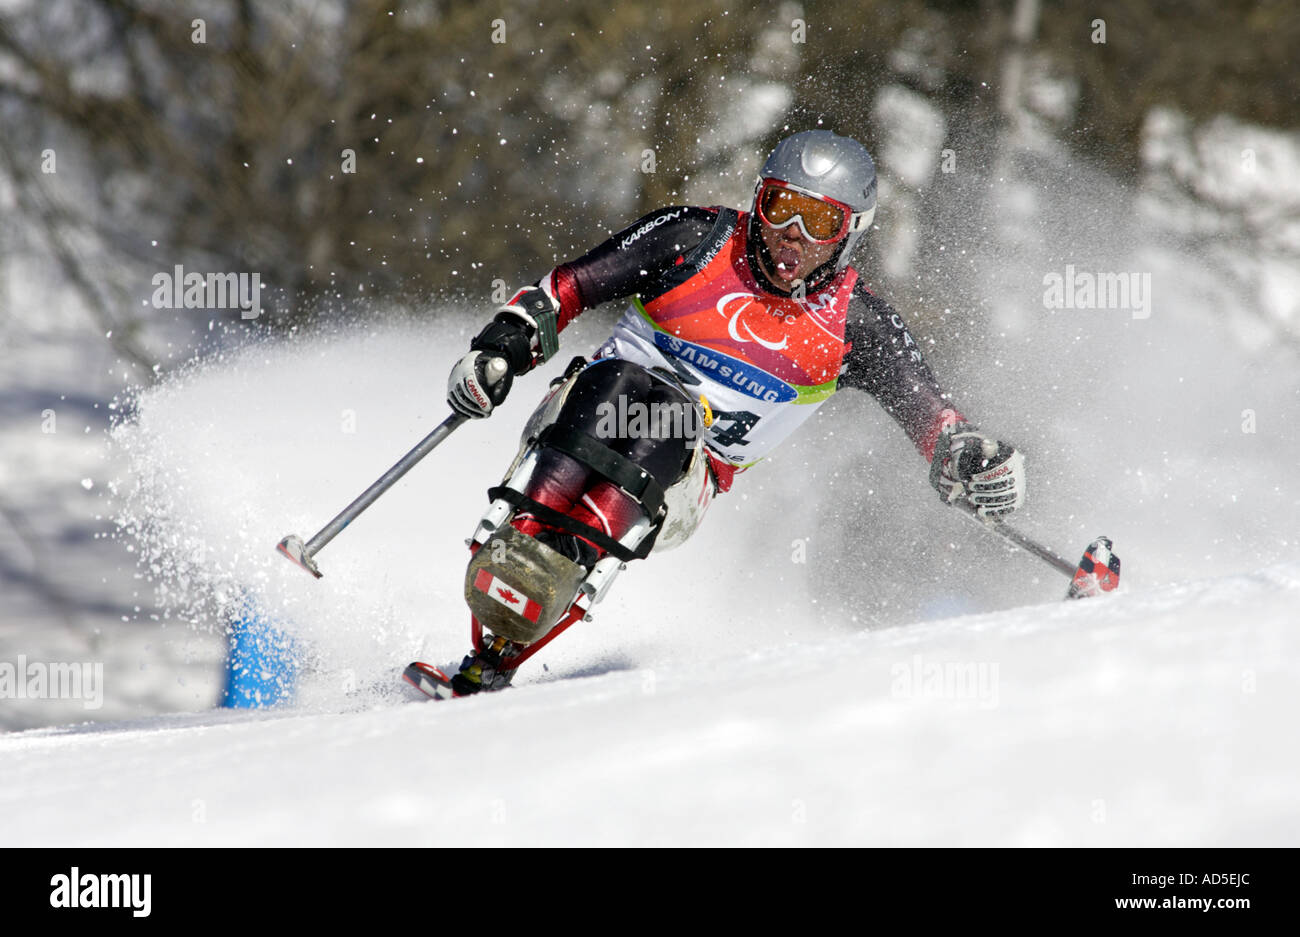 Jeffery Penner LW11 of Canada in the Mens Alpine Skiing Giant Slalom Sitting competition Stock Photo